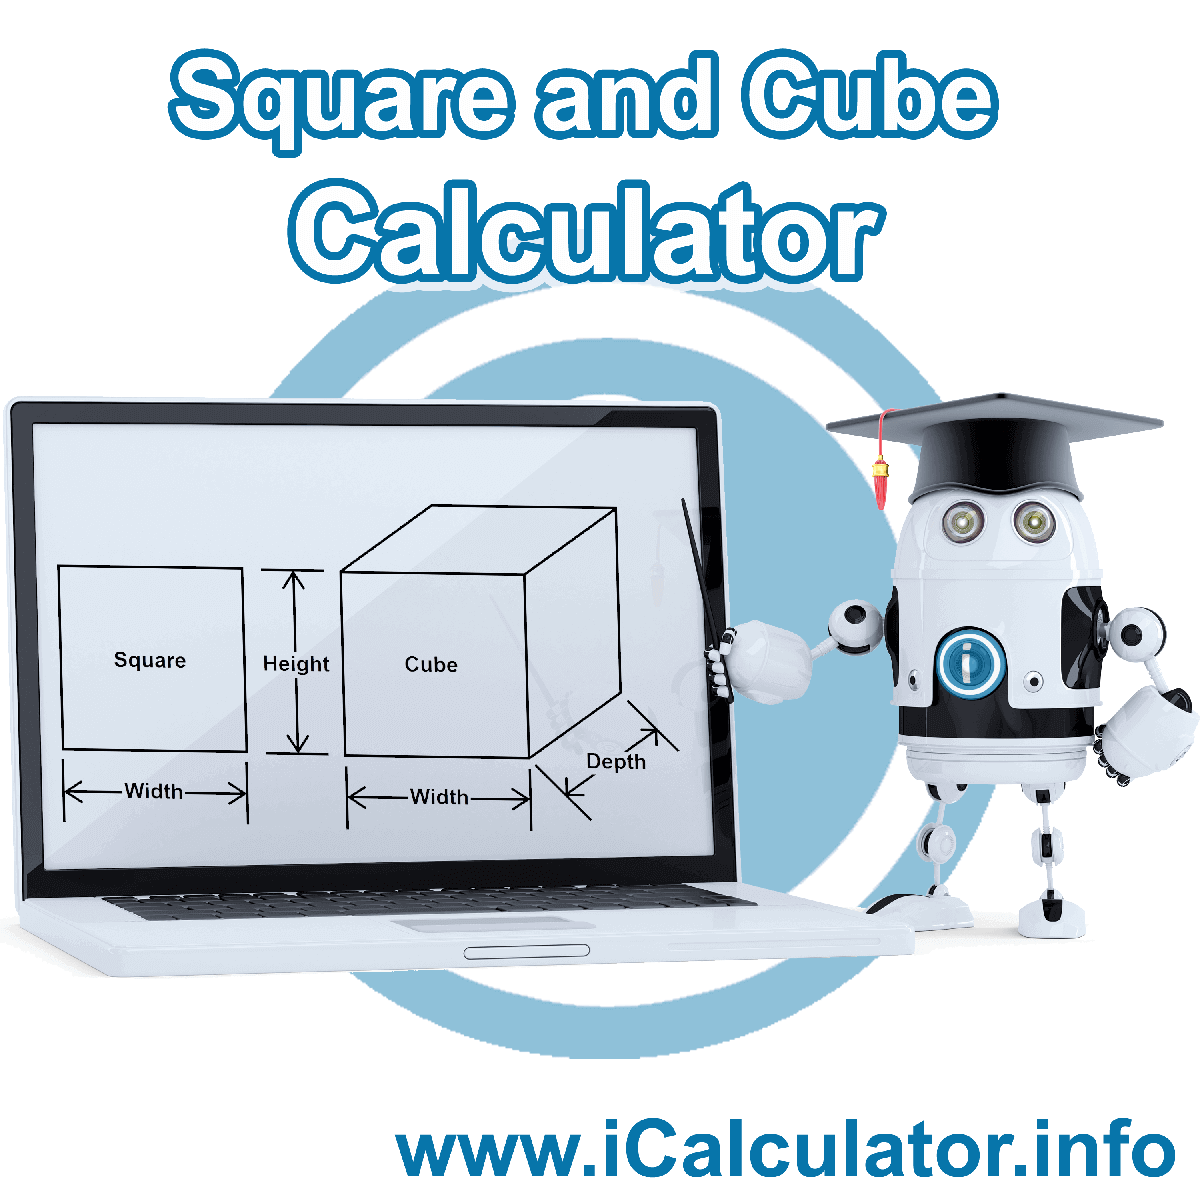 Square and Cube Calculator. This image shows the properties and formula for the Square and Cube Calculator